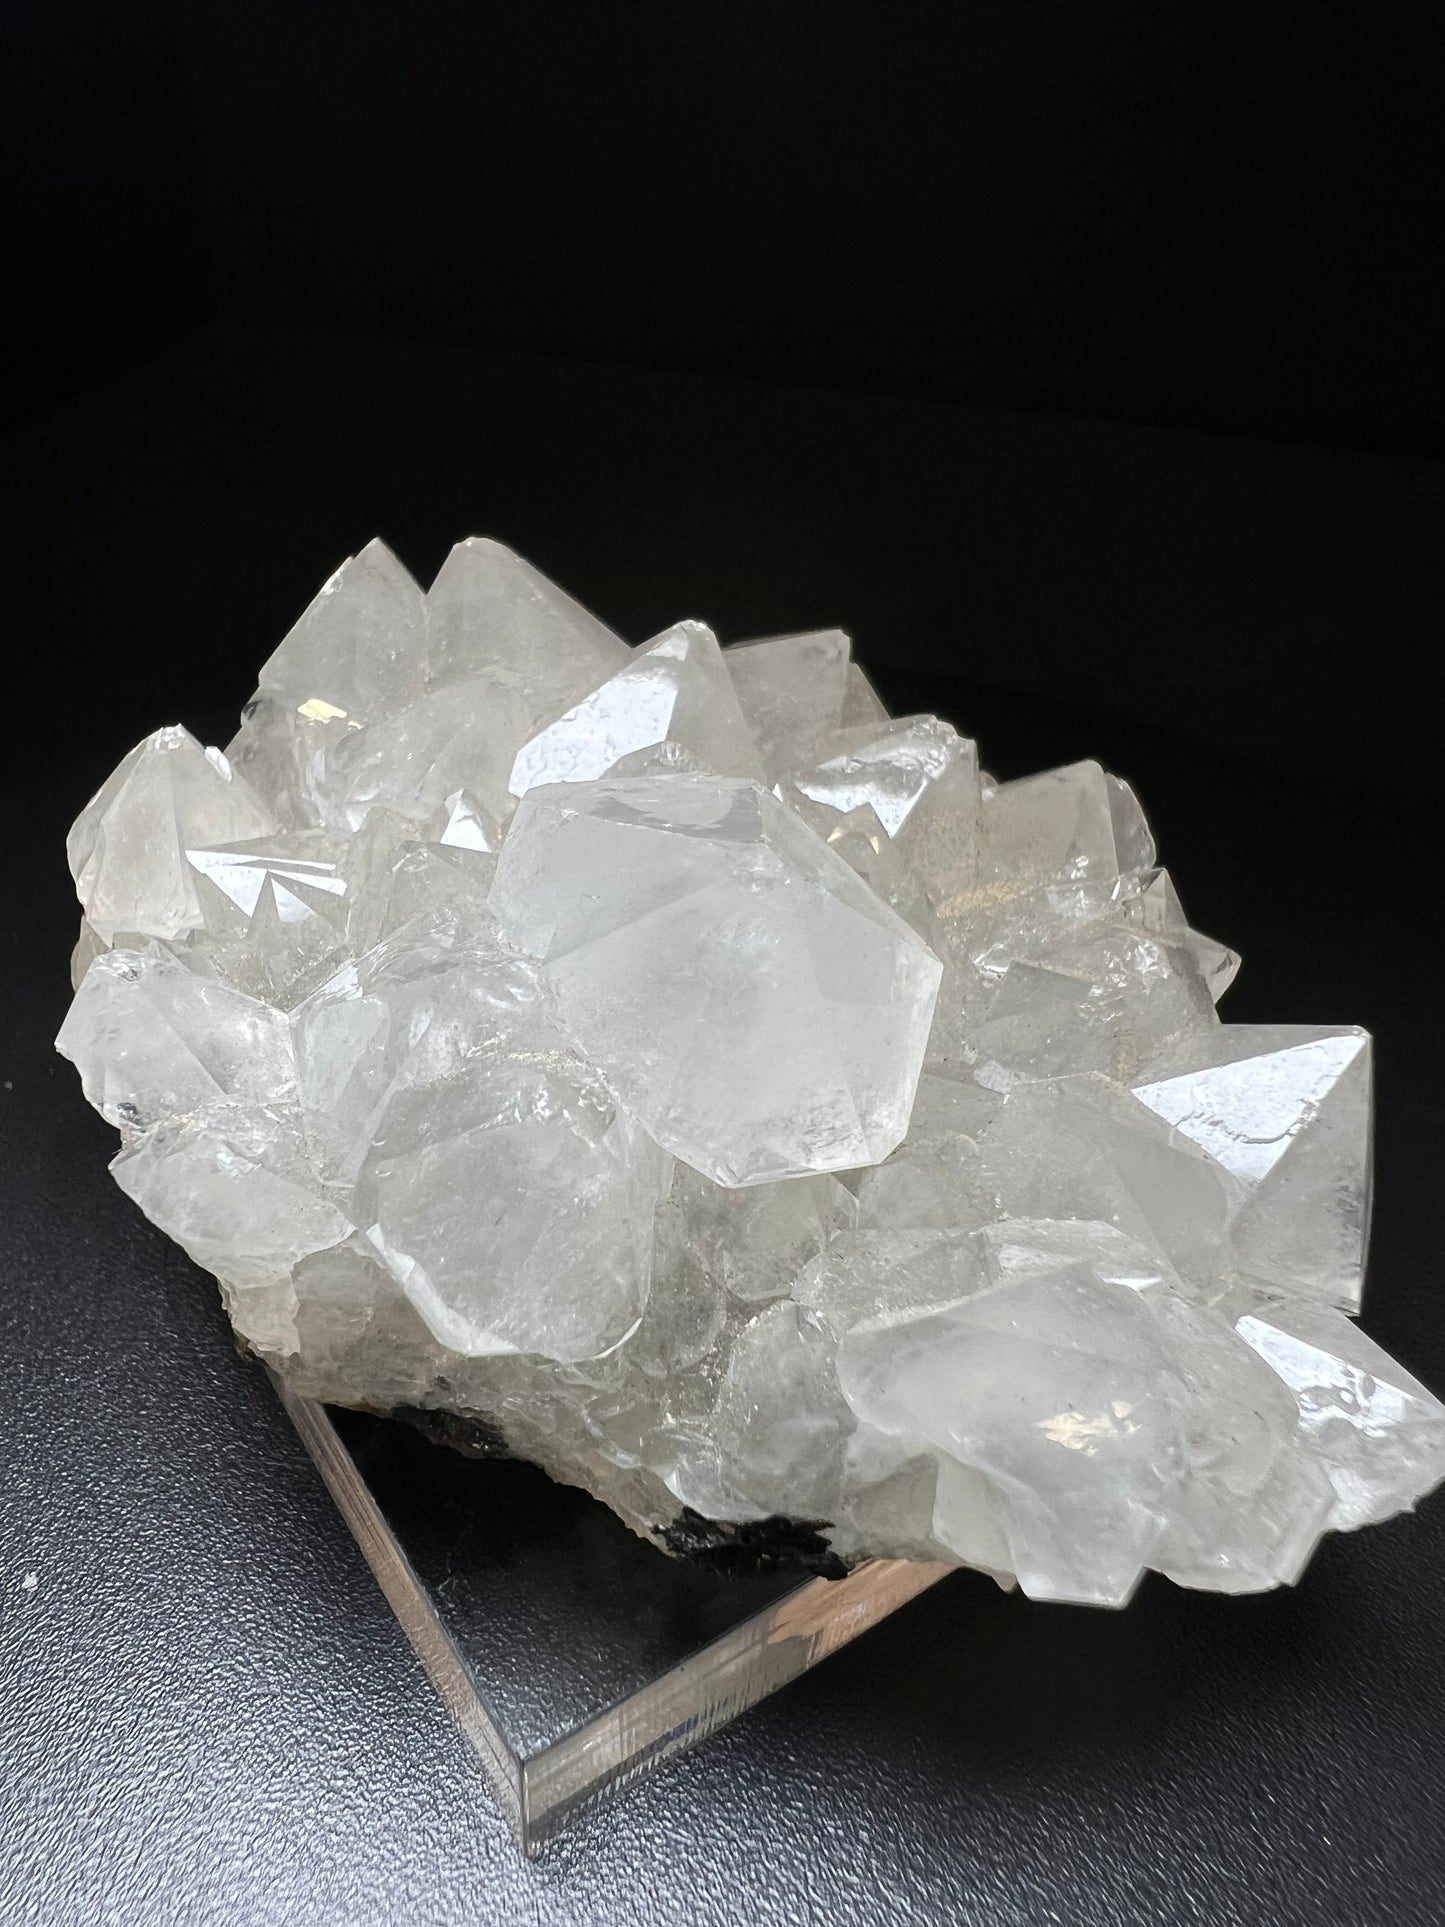 Stunning Beta Quartz From A Rare Location- Mineral, Specimen, Collectors Piece, Crystal Healing